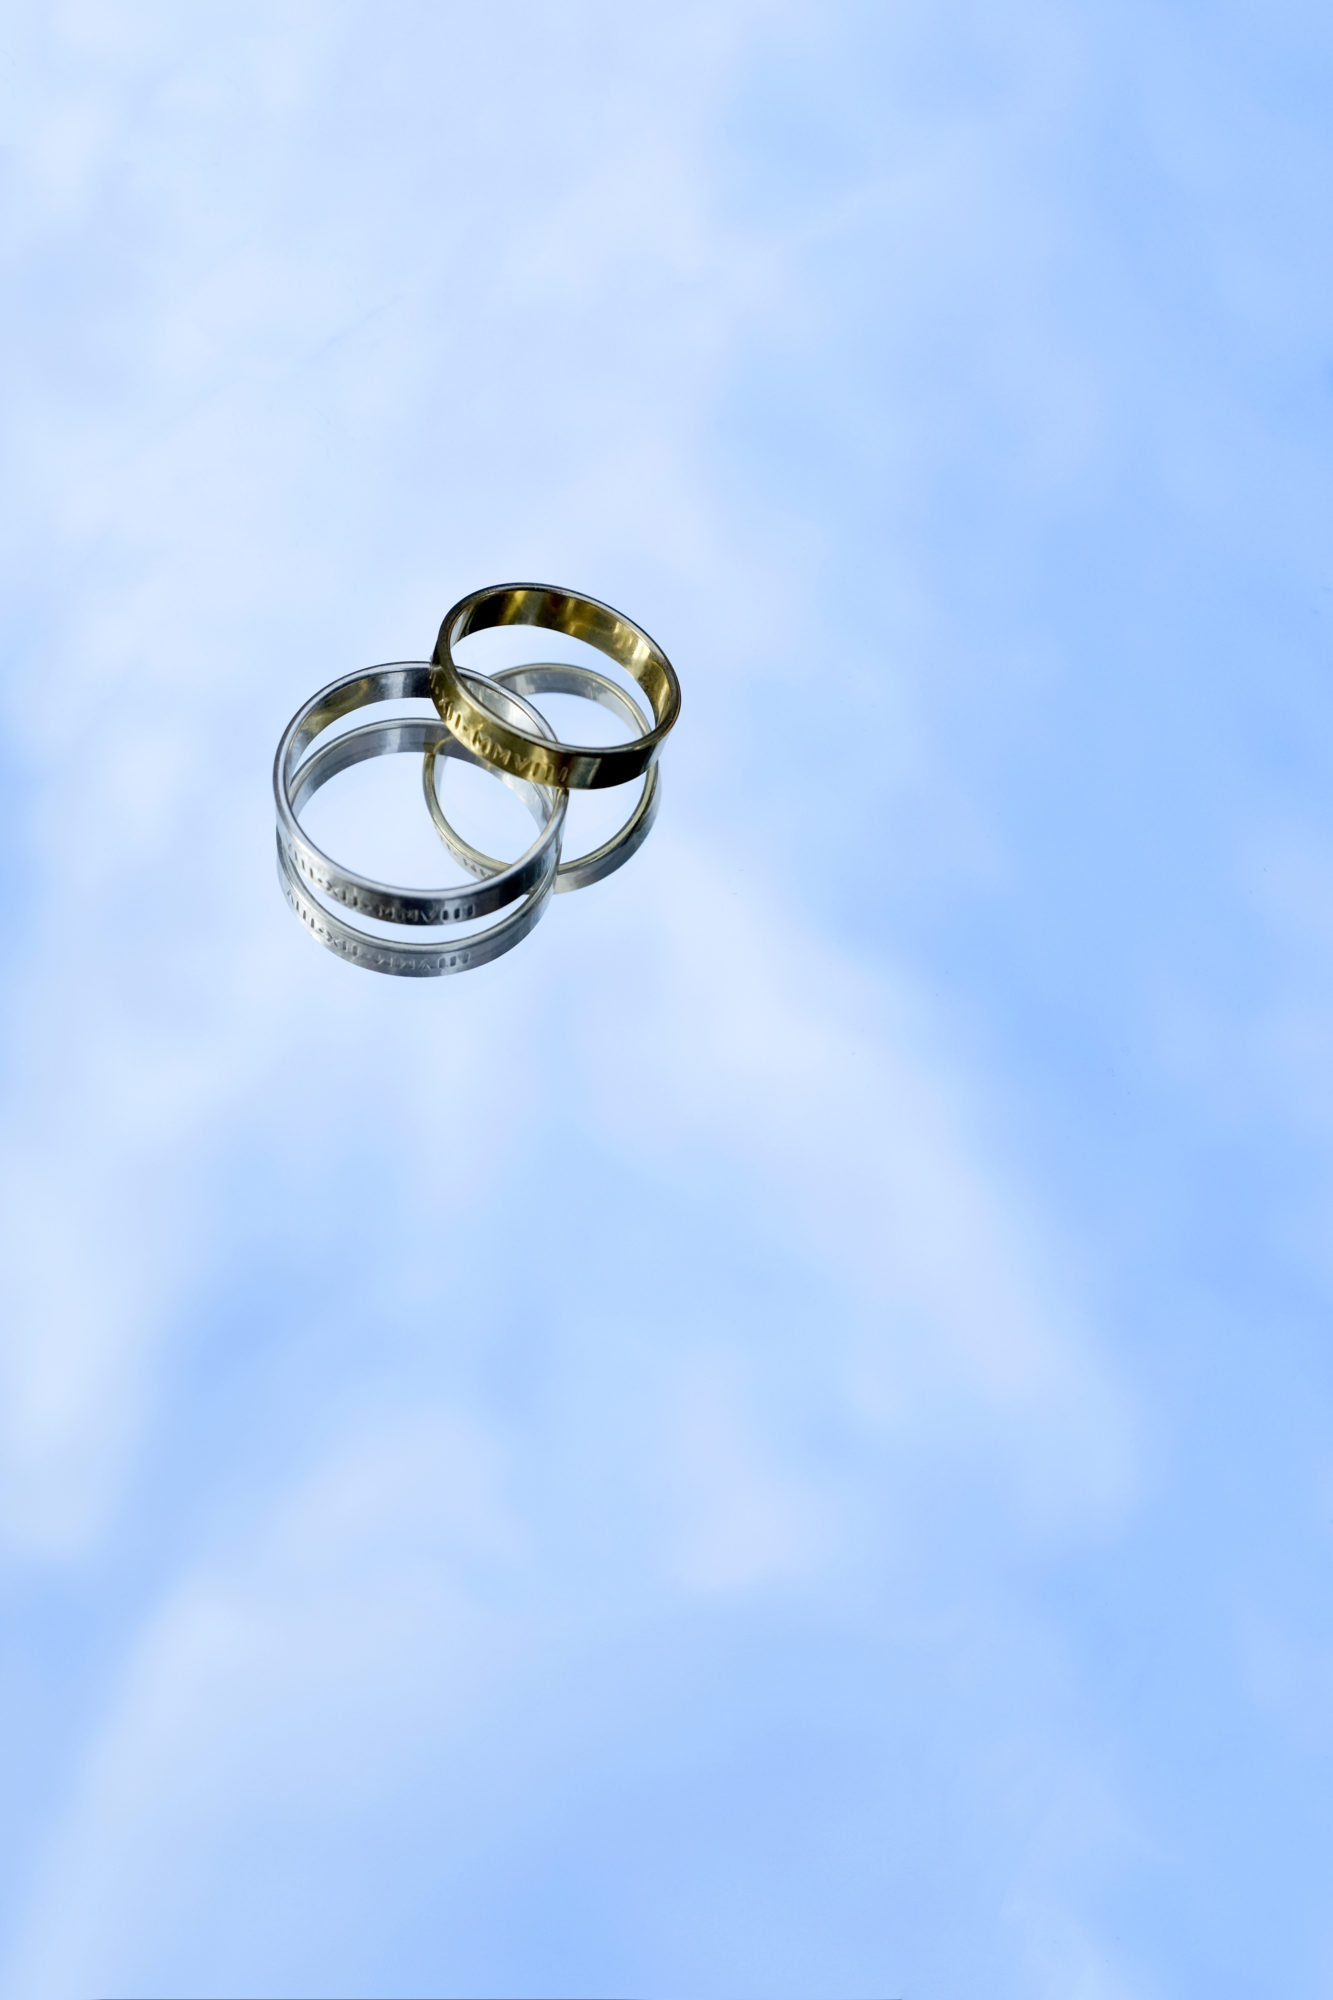 A gold and silver ring sit with the reflection of the sky below